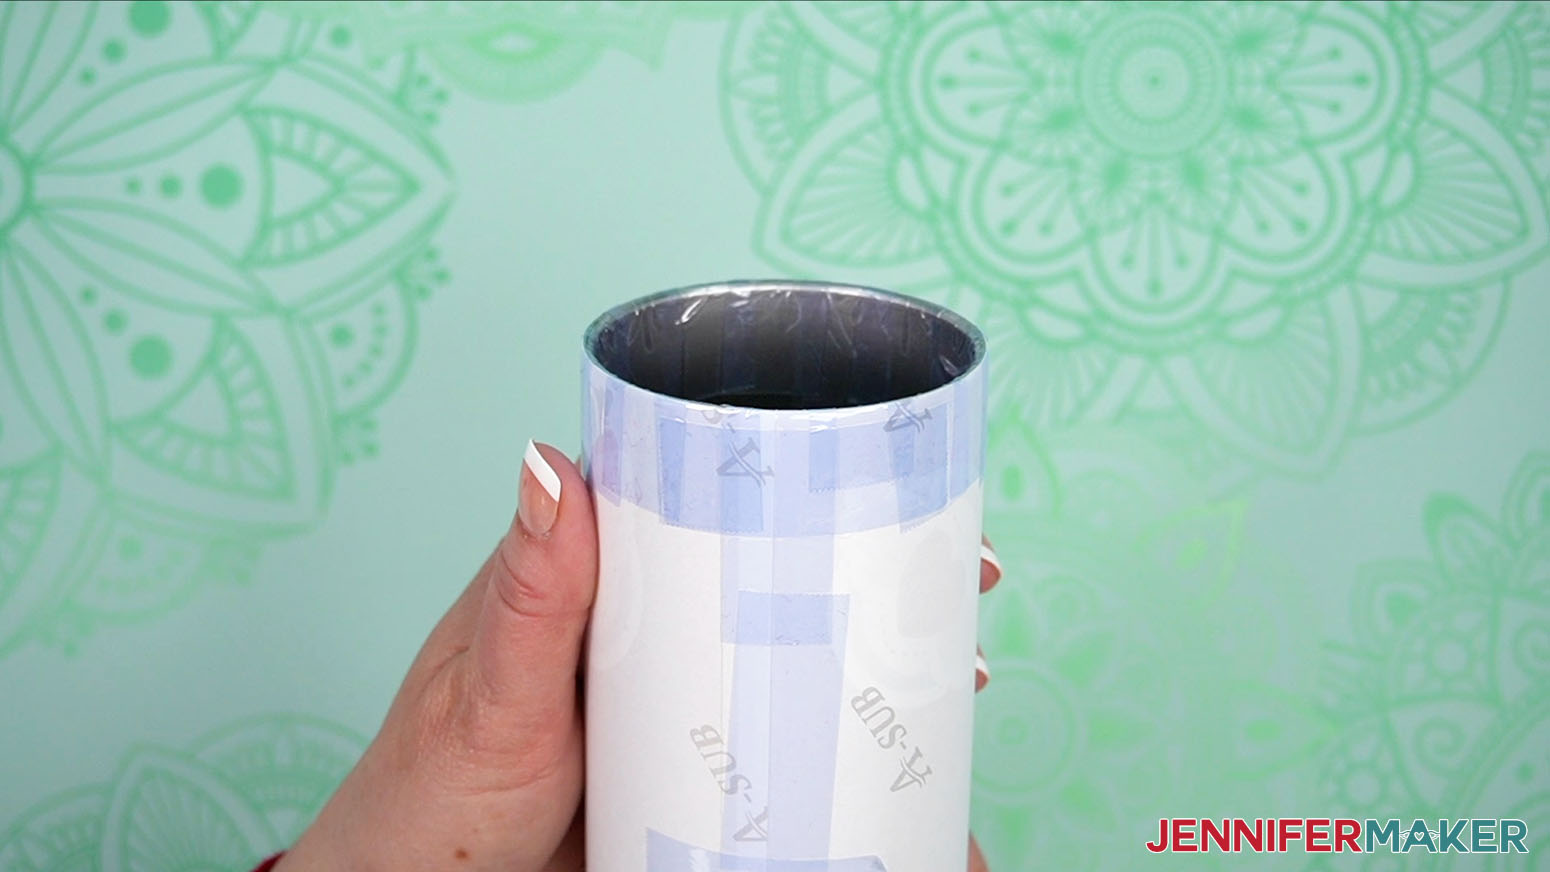 Secure the design to the tumbler by making sure it is taped all the way around the edges of the design.